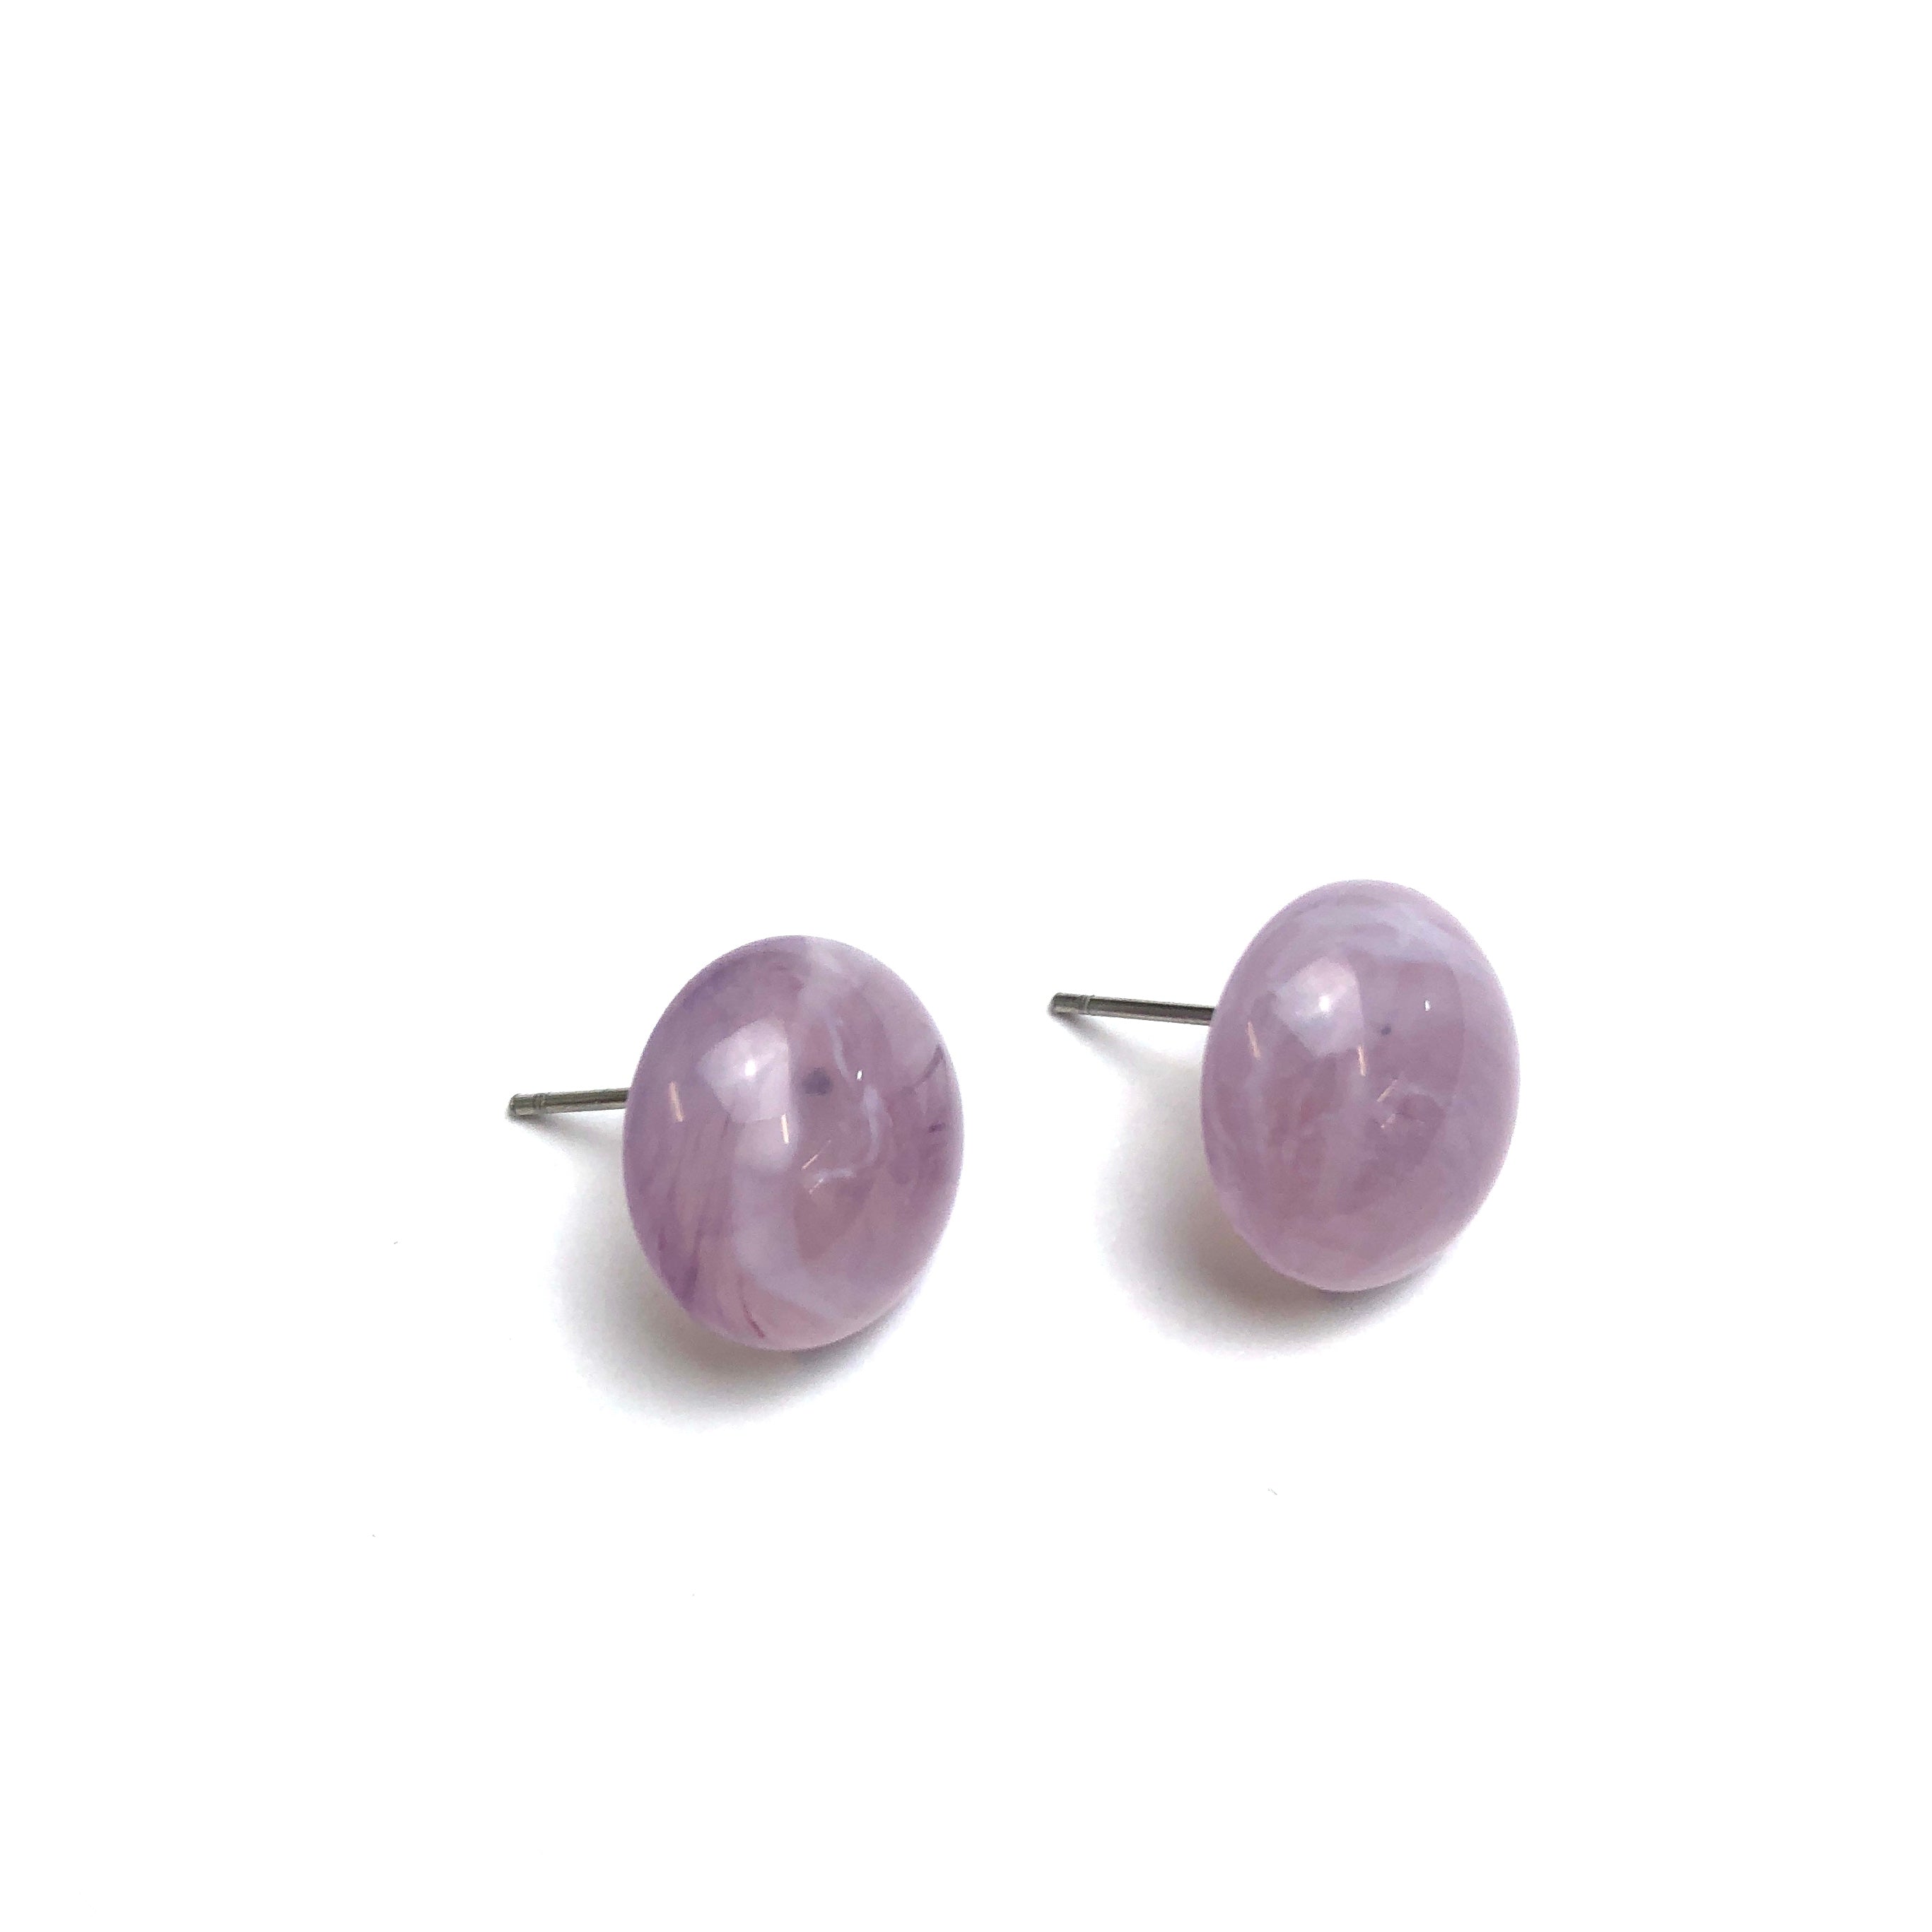 Lilac Marbled Retro Button Stud Earrings